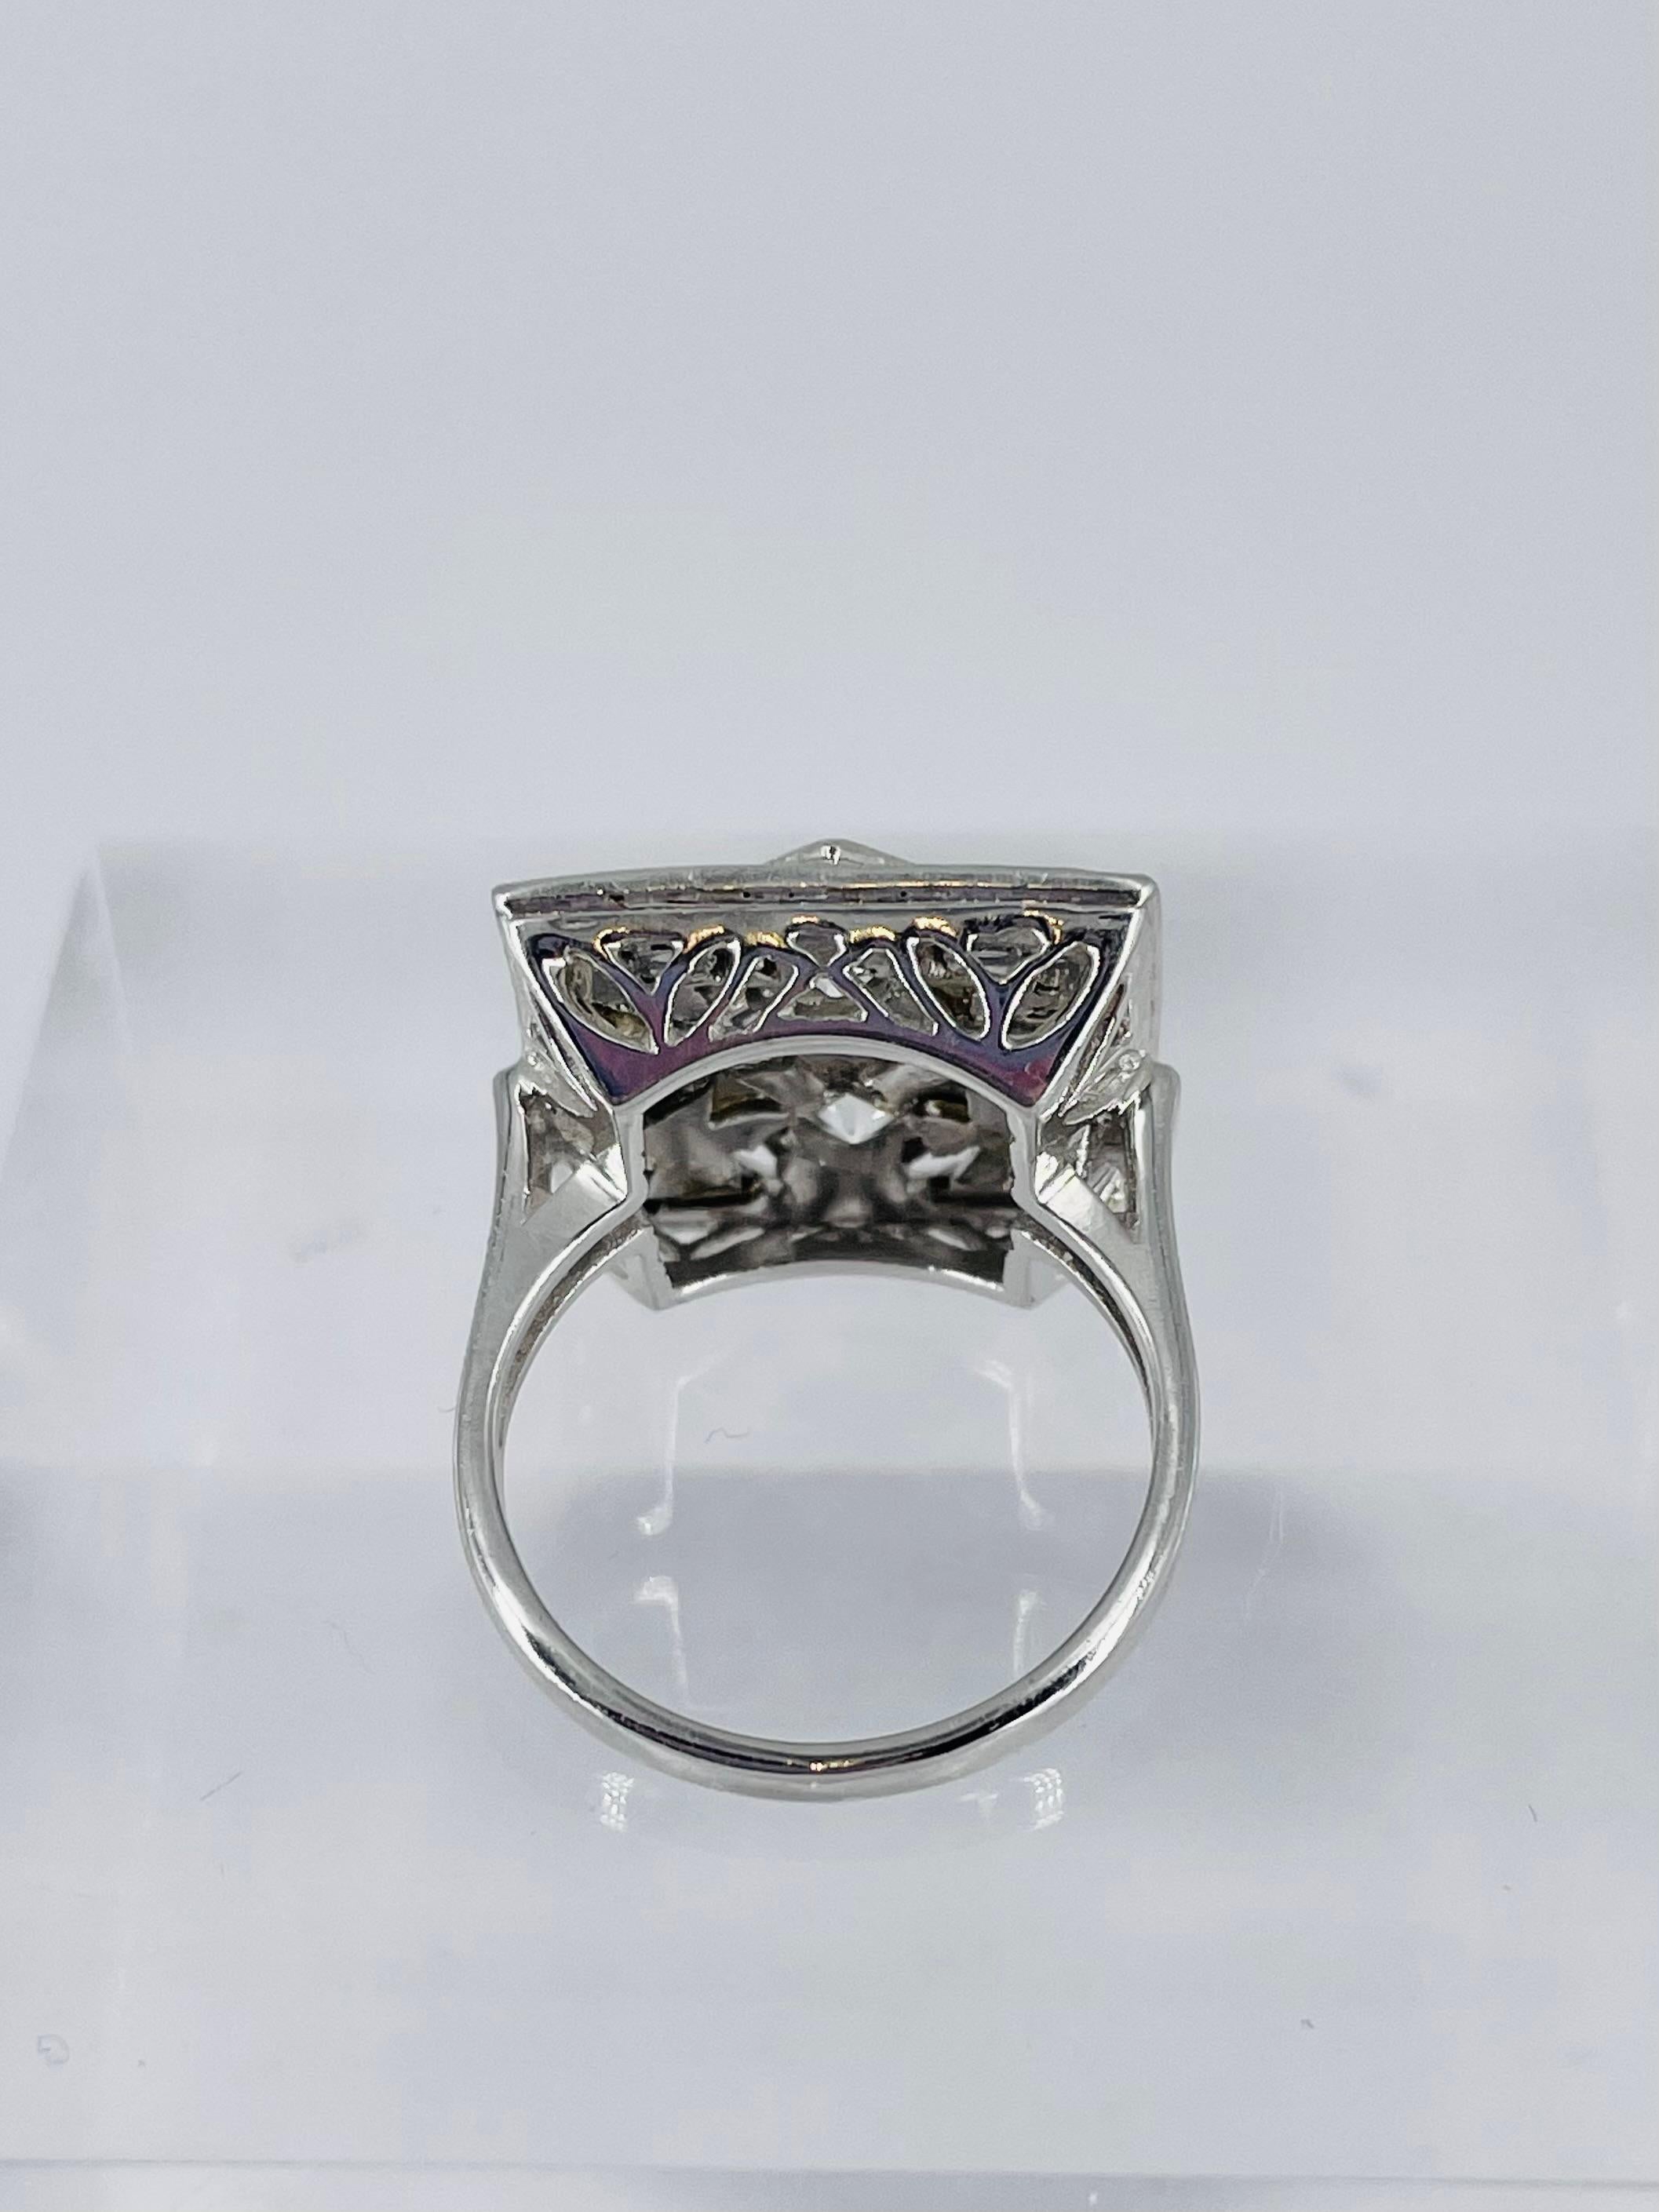 J. Birnbach Antique Filigree Ring with Old European Cut Diamonds In Excellent Condition For Sale In New York, NY